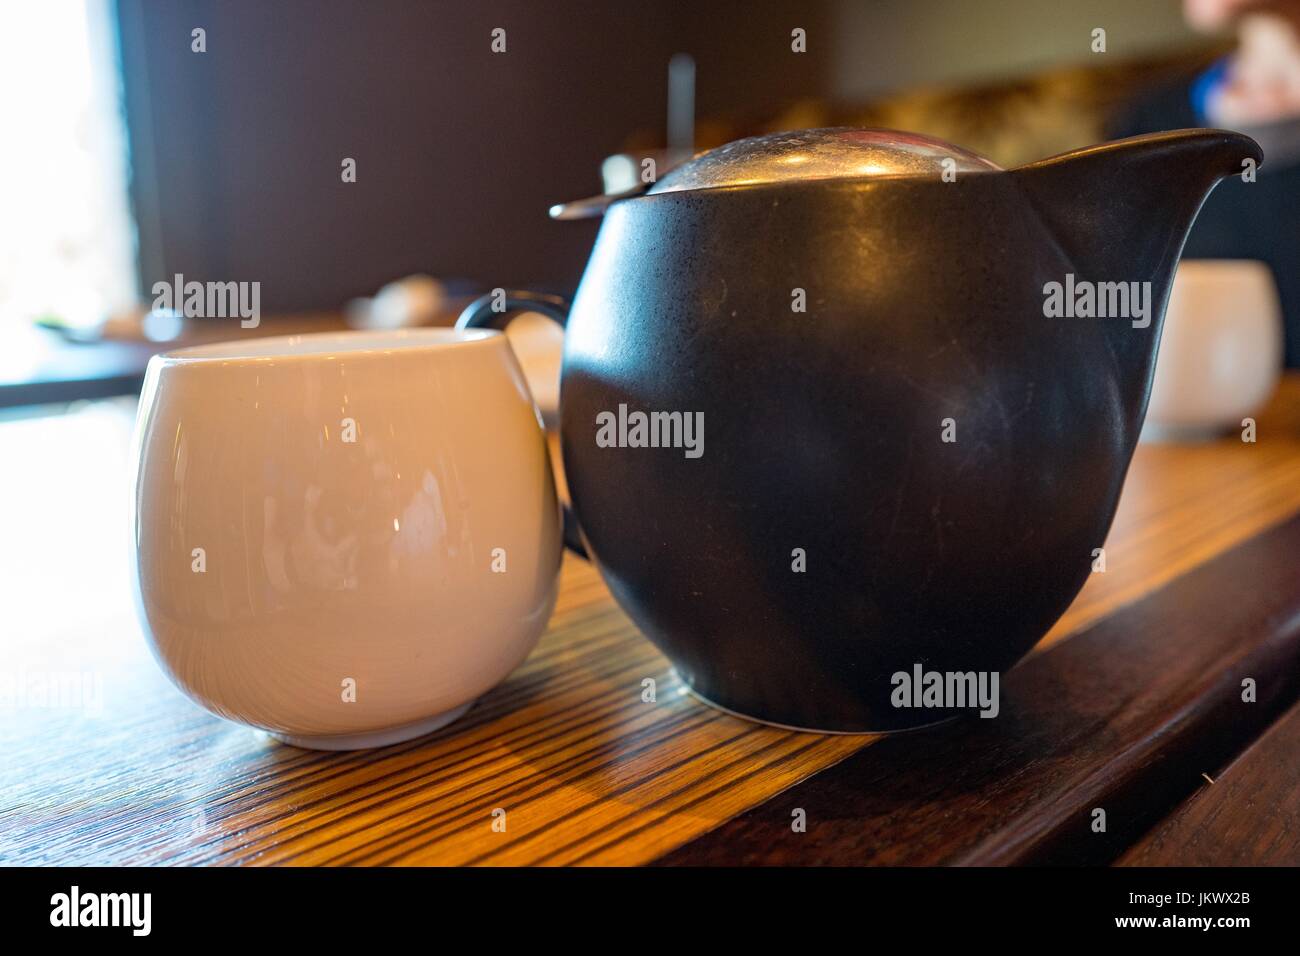 Closeup of a cup of green tea next to a tea kettle on a wooden table, July 18, 2017. Stock Photo